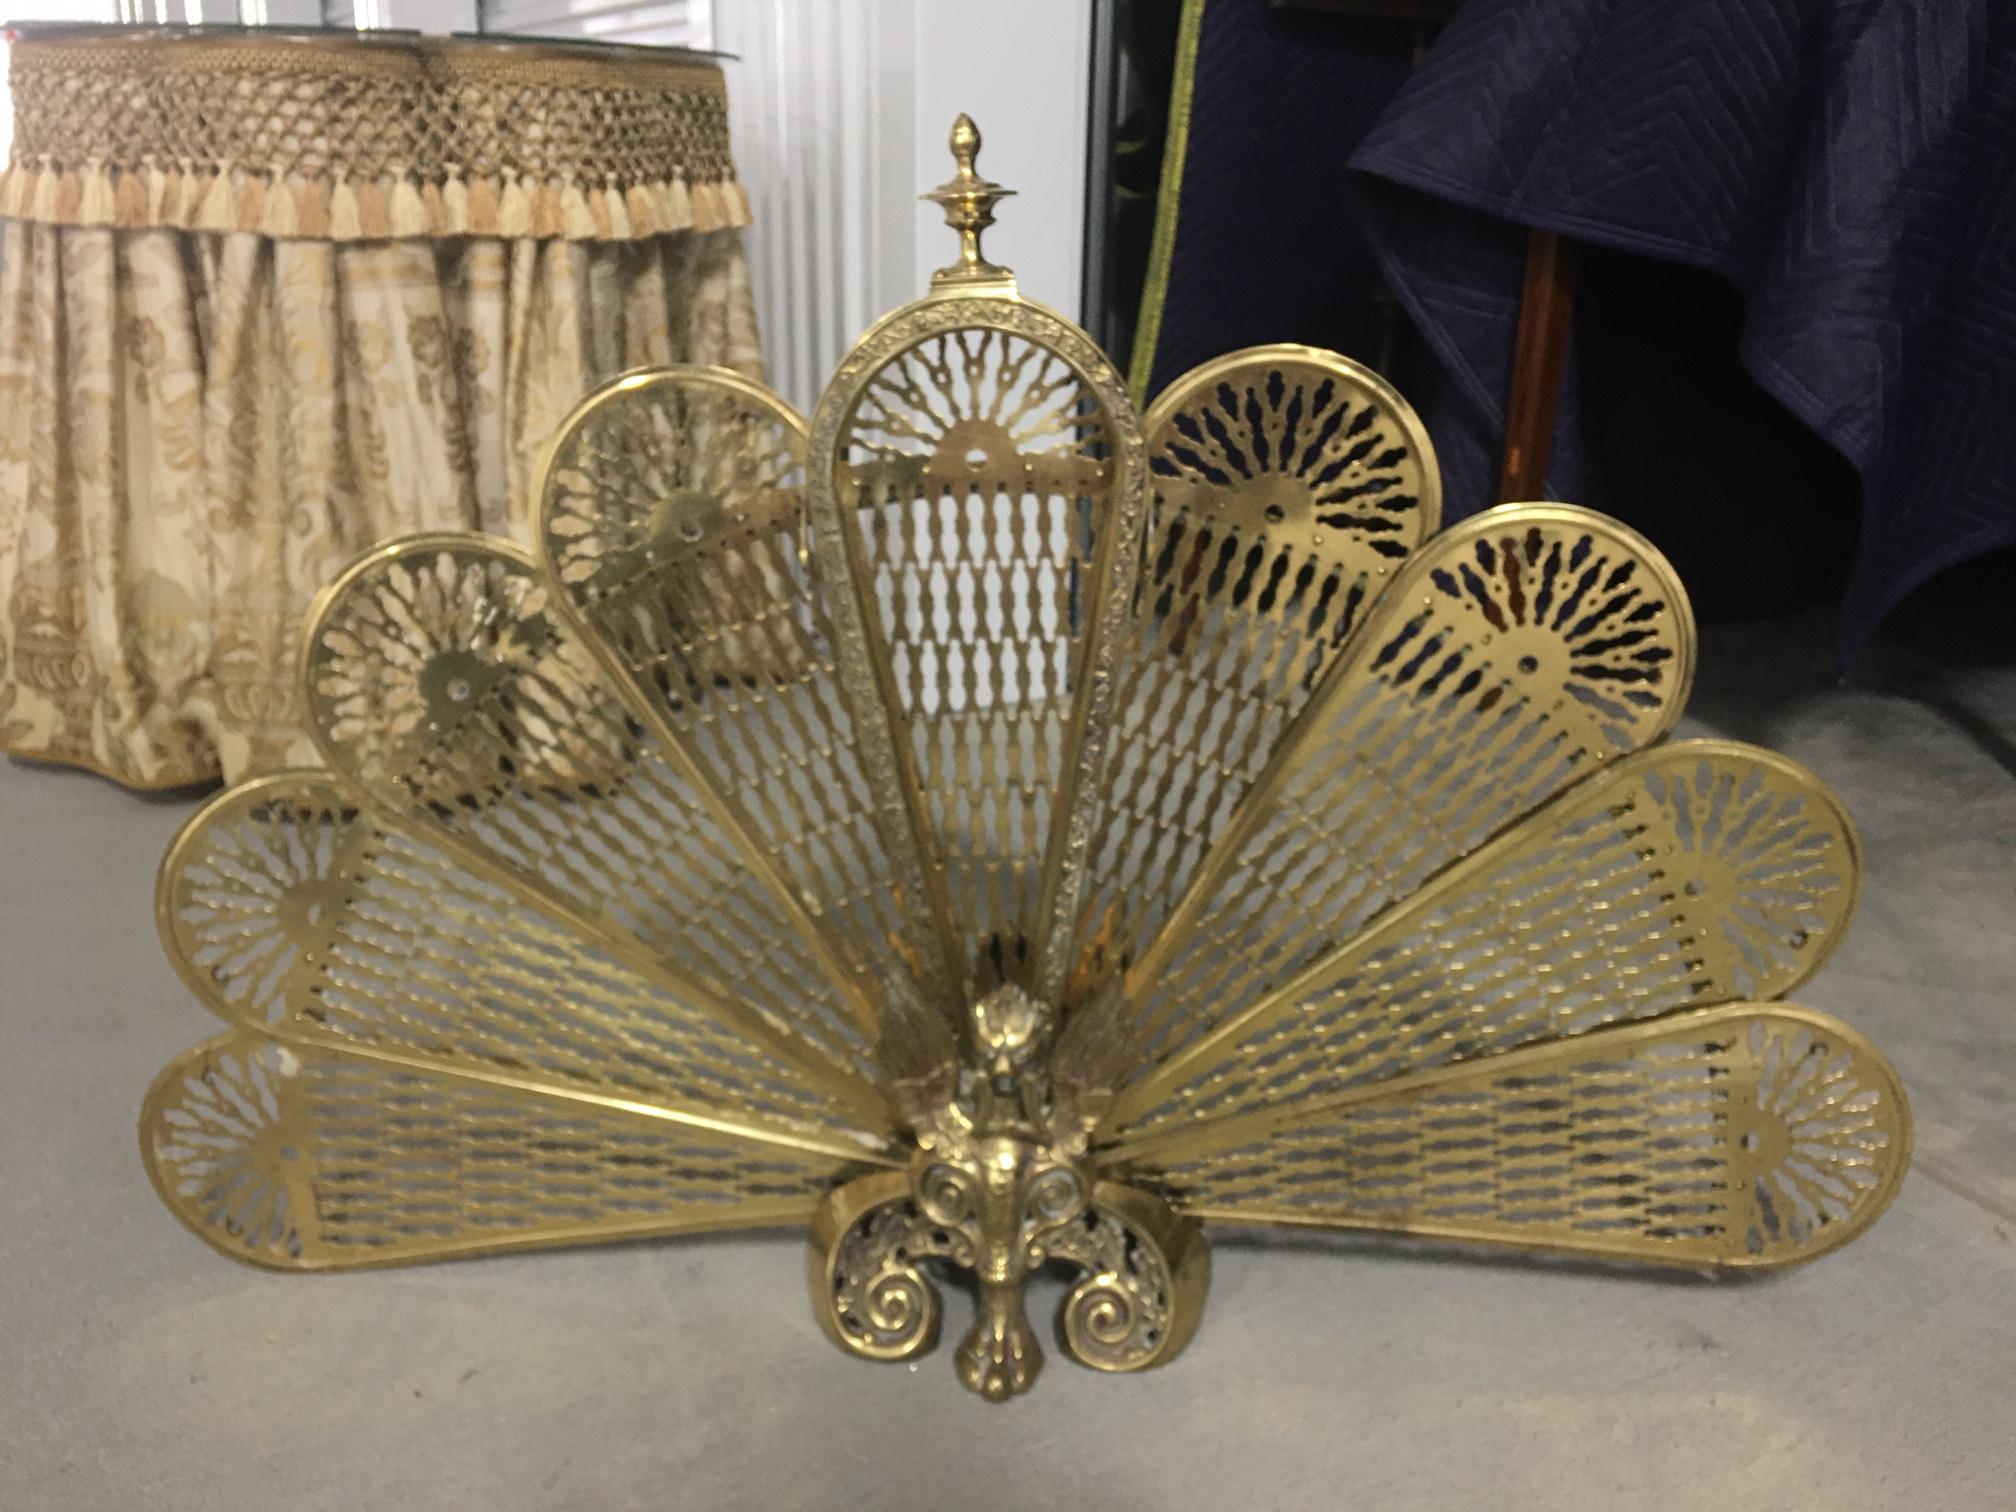 Brass Fan Screen with a Decorative Finial, 19th Century 3